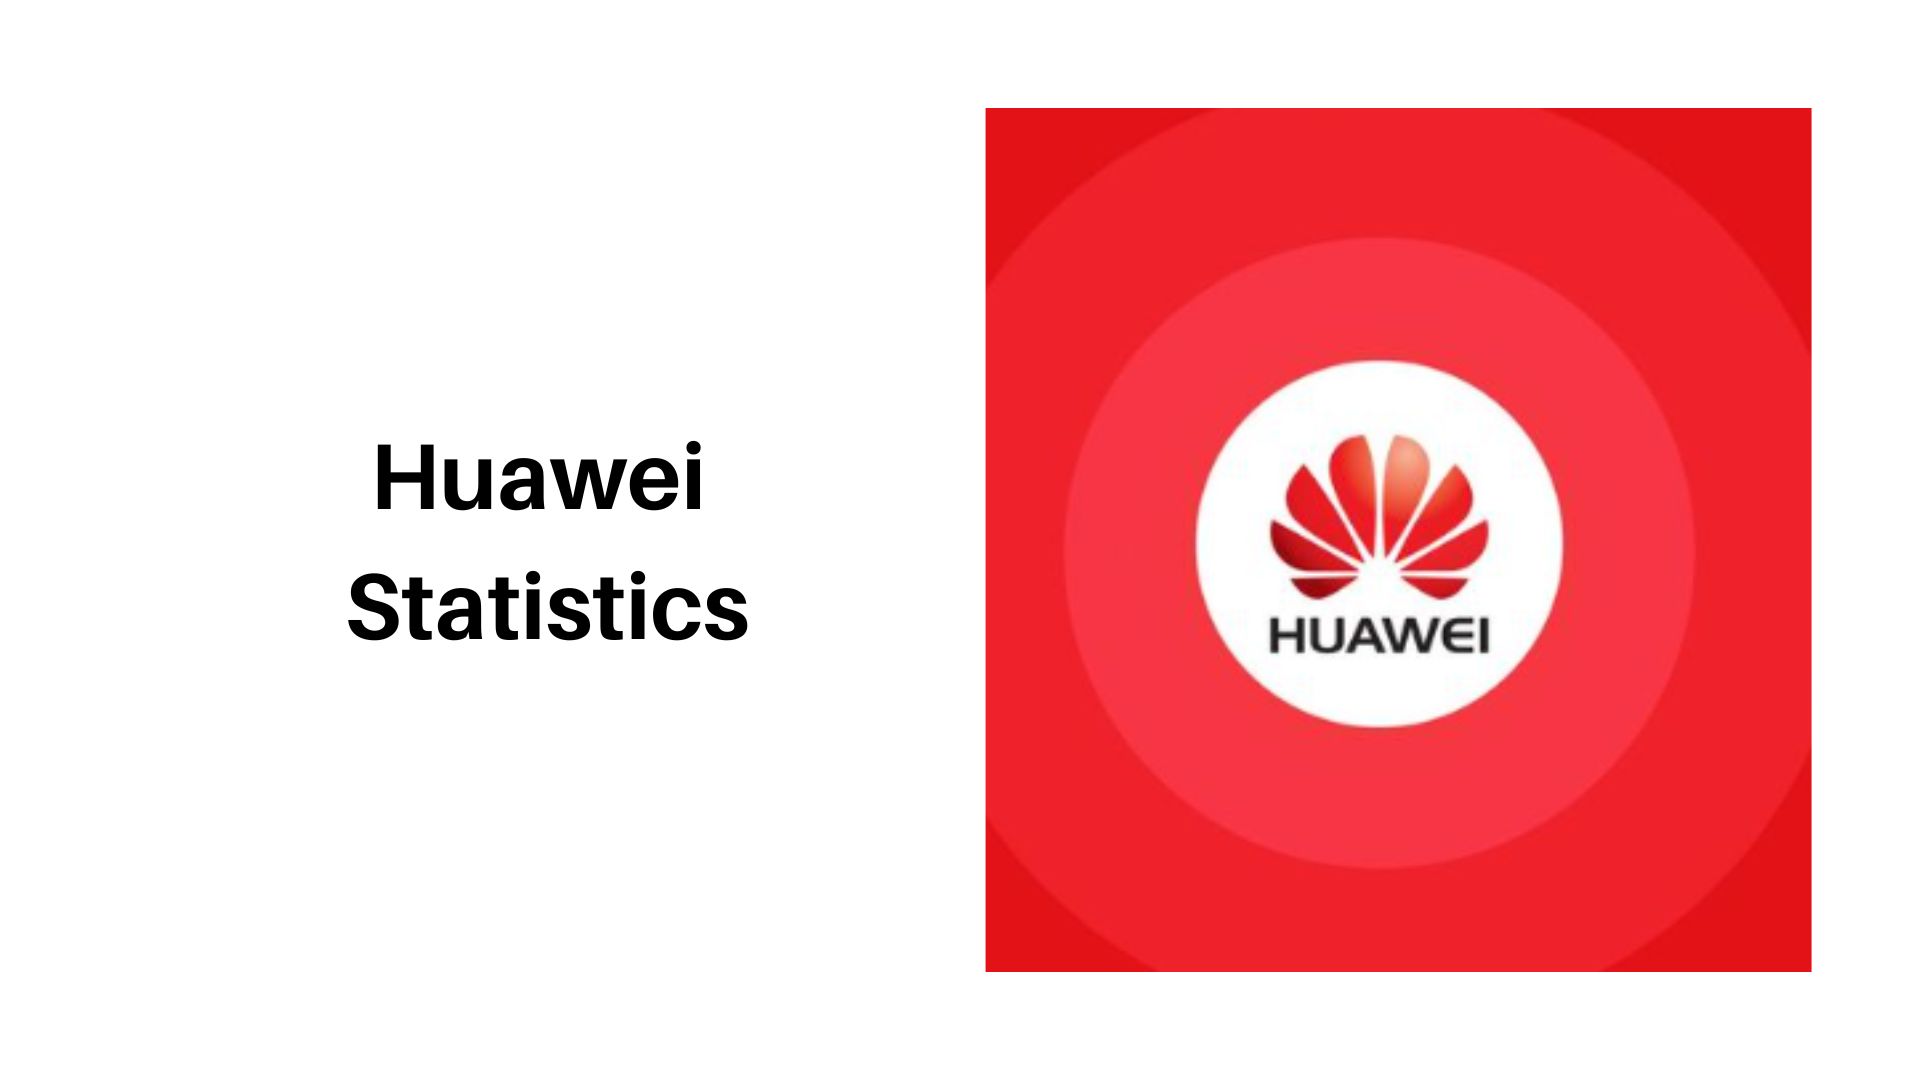 Huawei Statistics By Market Share, Countries, Region, Customer Group, Operating System, Industry, Demographics, Category Distribution and Social Media